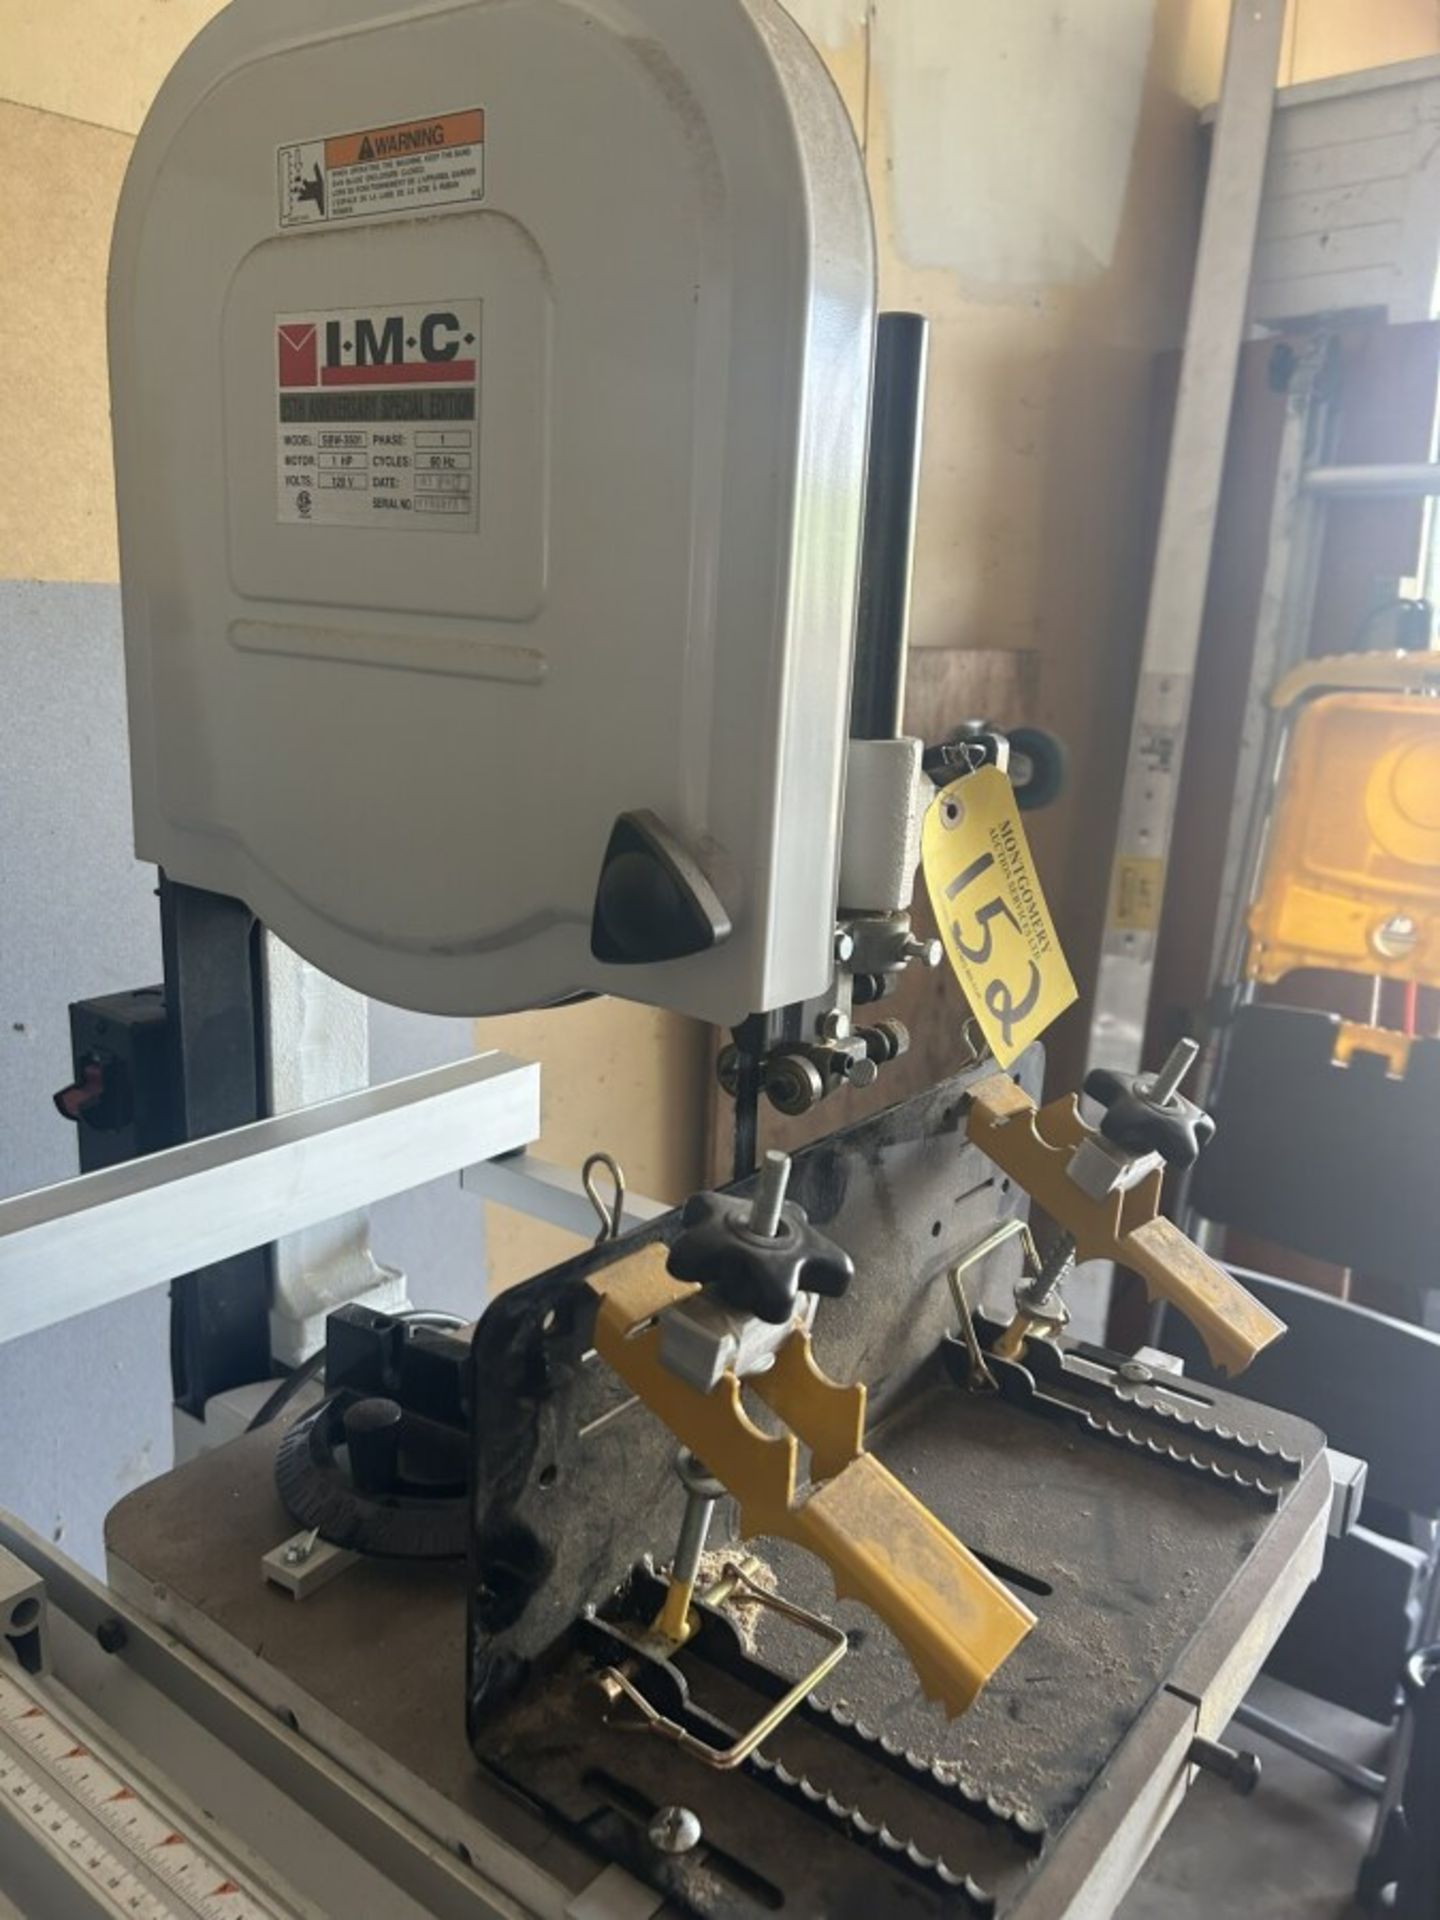 IMC SBW-3501 BAND SAW 25TH ANNIVERSARY SPECIAL EDITION, 1HP/120V/1PH - Image 3 of 8